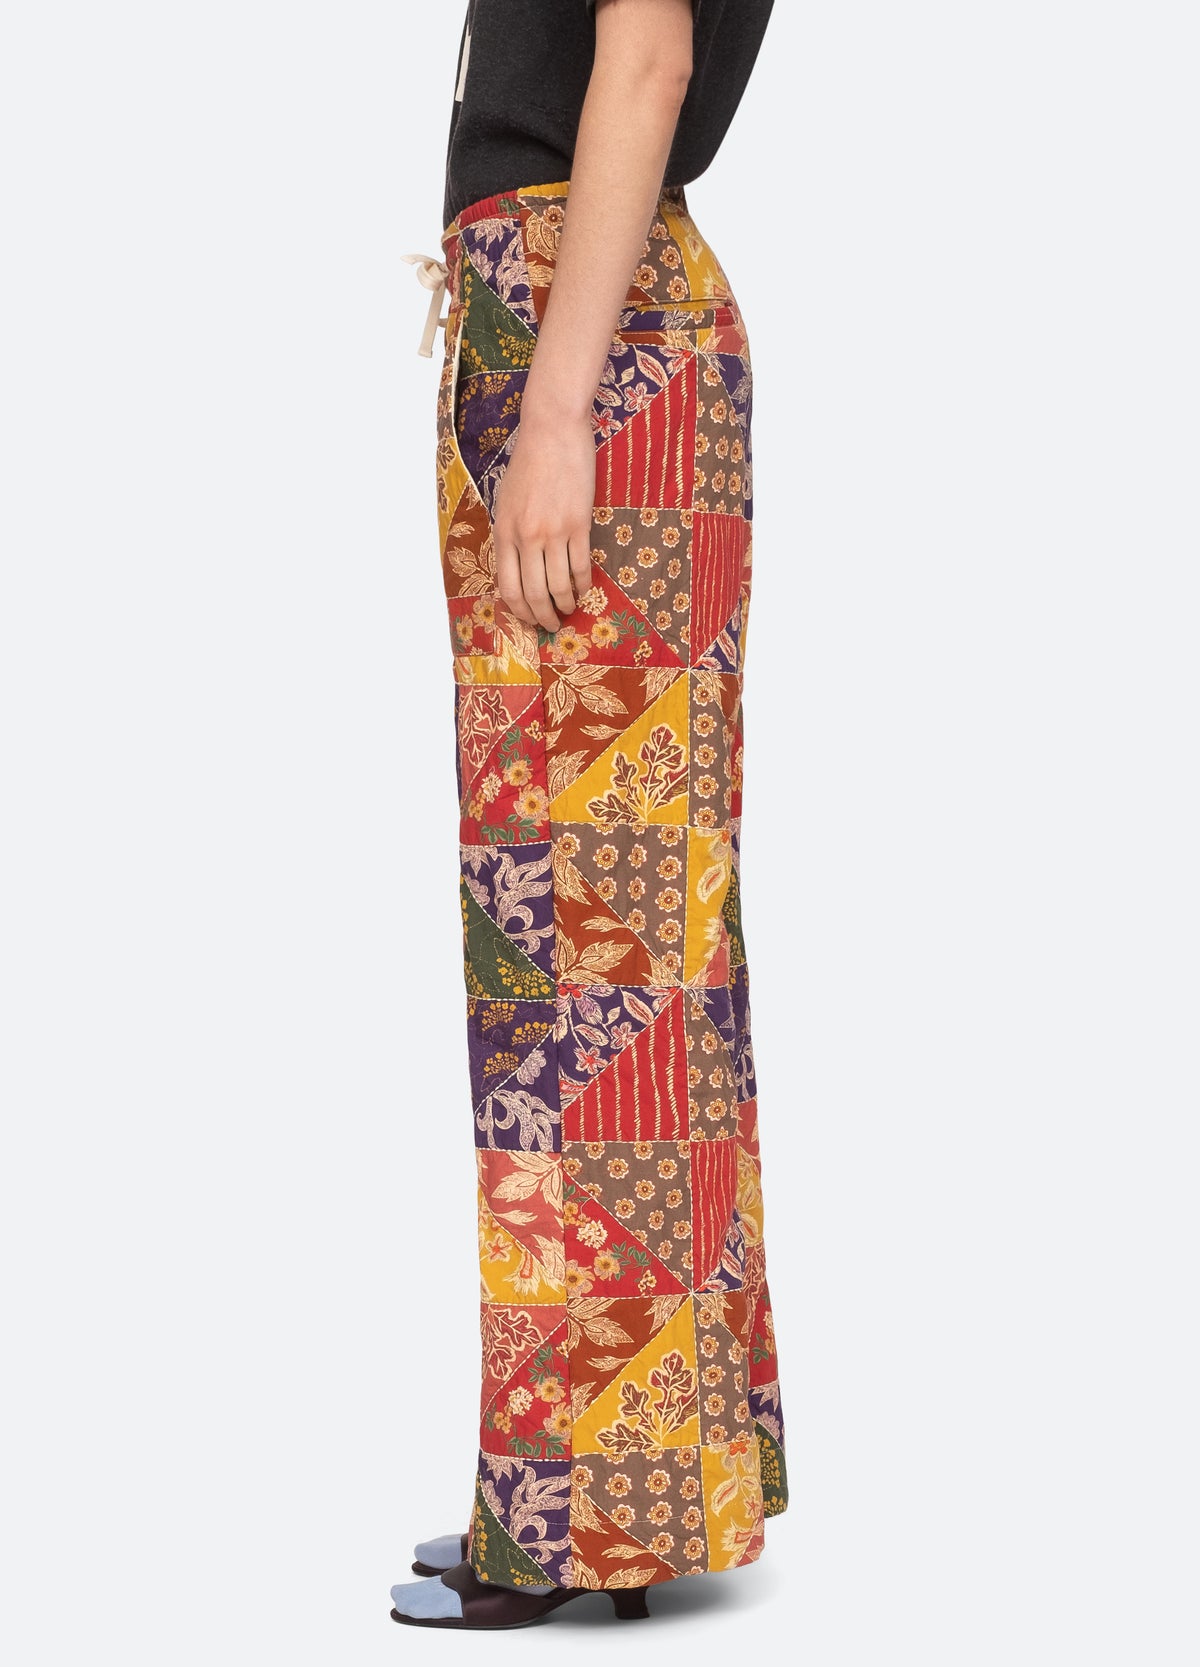 PRINTED PAREO PANTS - Multicolored